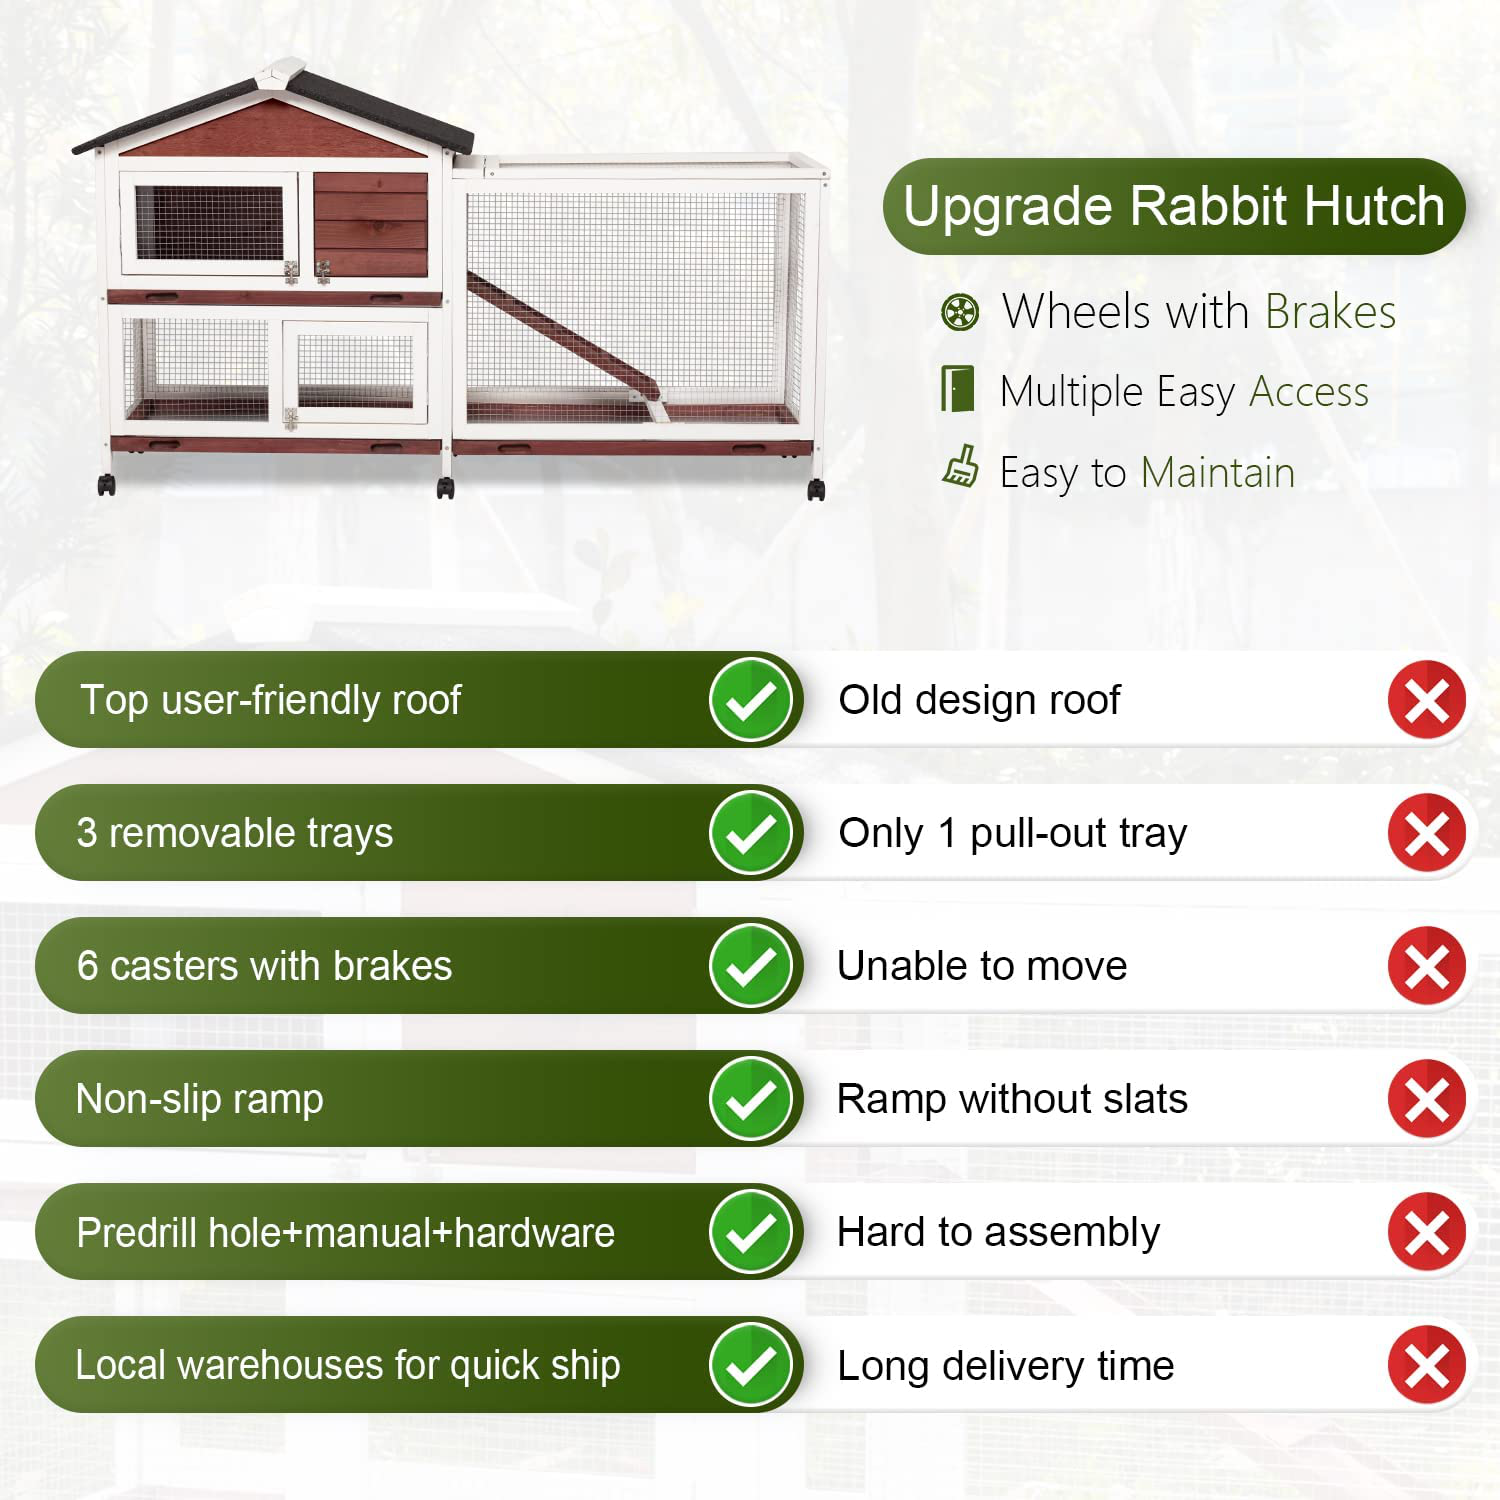 Rabbit Hutch Outdoor Bunny Cage - Large Bunny Hutch with Runs House Small Animal Habitats for Guinea Pigs Hamster Removable Tray Two Tier Waterproof Roof Pet Supplies Cottage Poultry Pen Enclosure Animals & Pet Supplies > Pet Supplies > Small Animal Supplies > Small Animal Habitats & Cages Kinpaw   